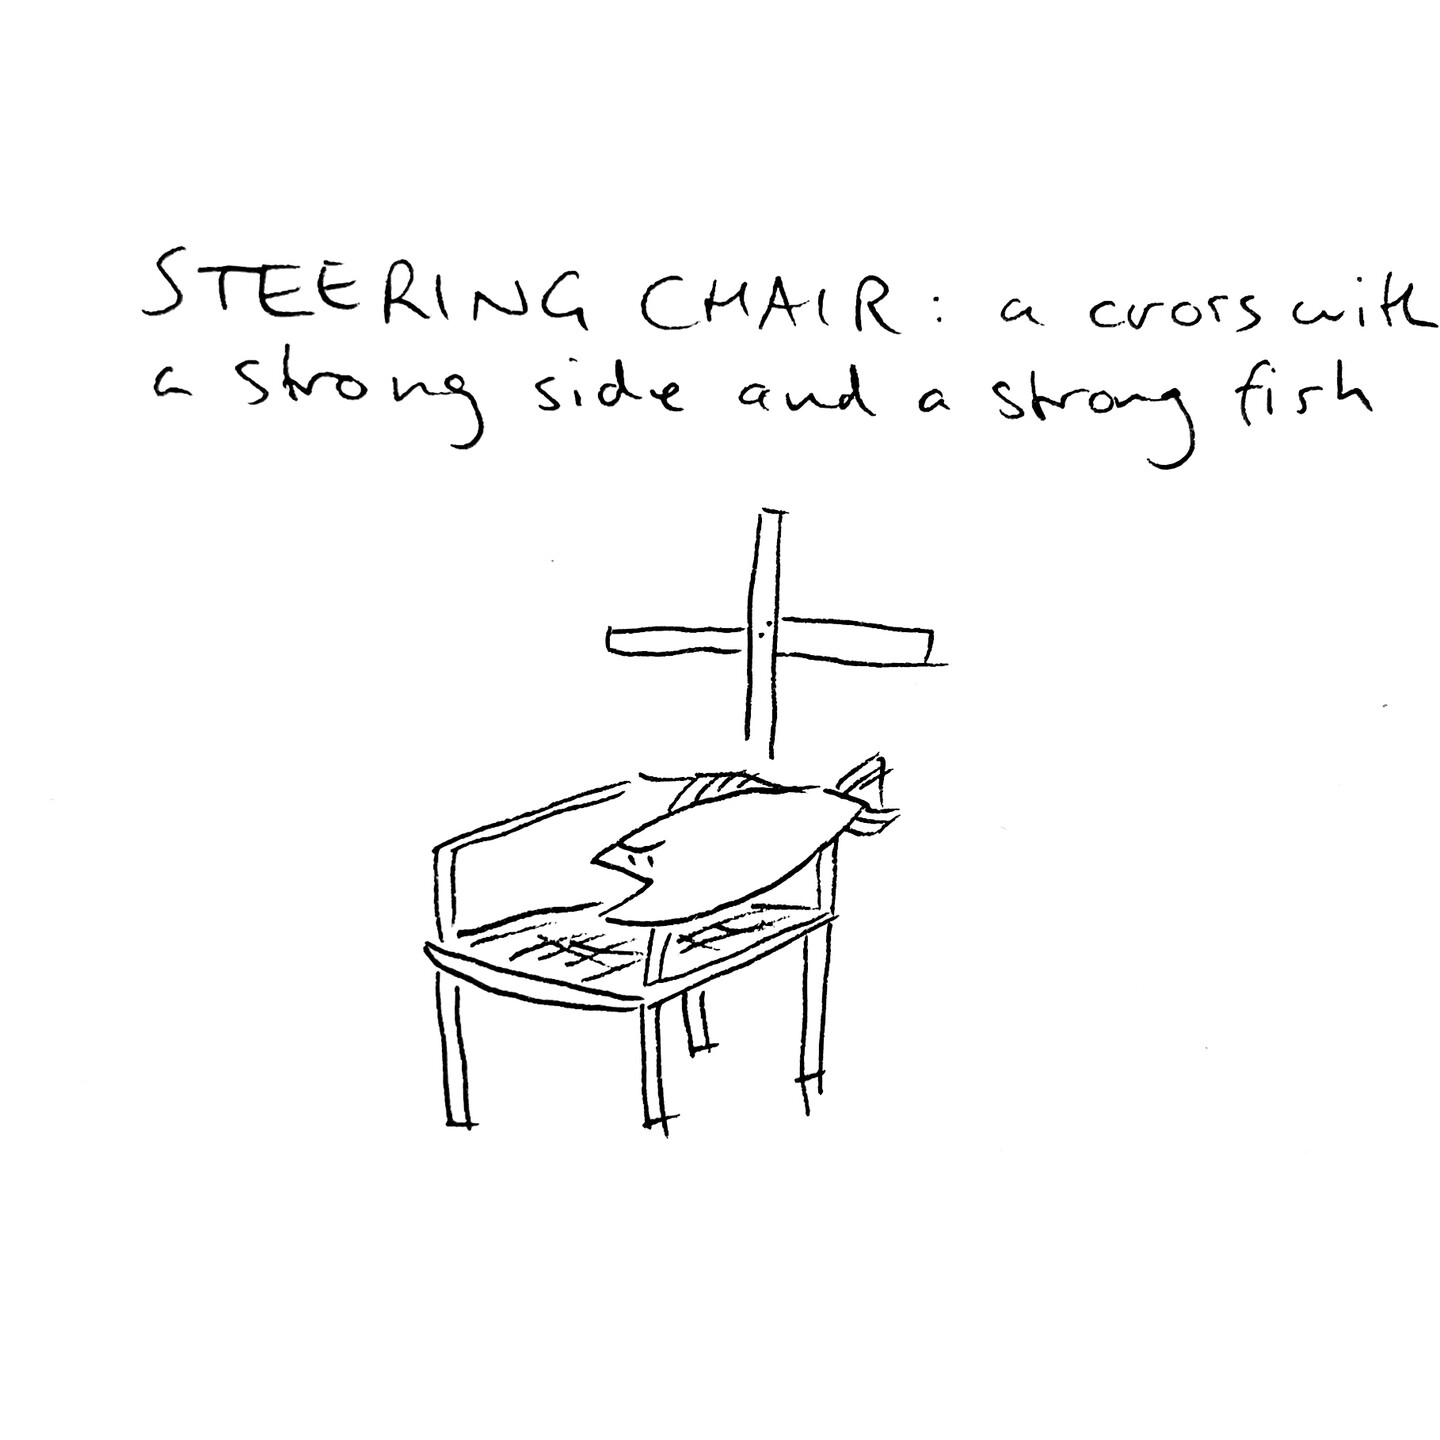 STEERING CHAIR: a cross with a strong side and a strong fish. The drawing depicts a spindly chair with a fish taking the place of one of the armrests and a cross at the back.